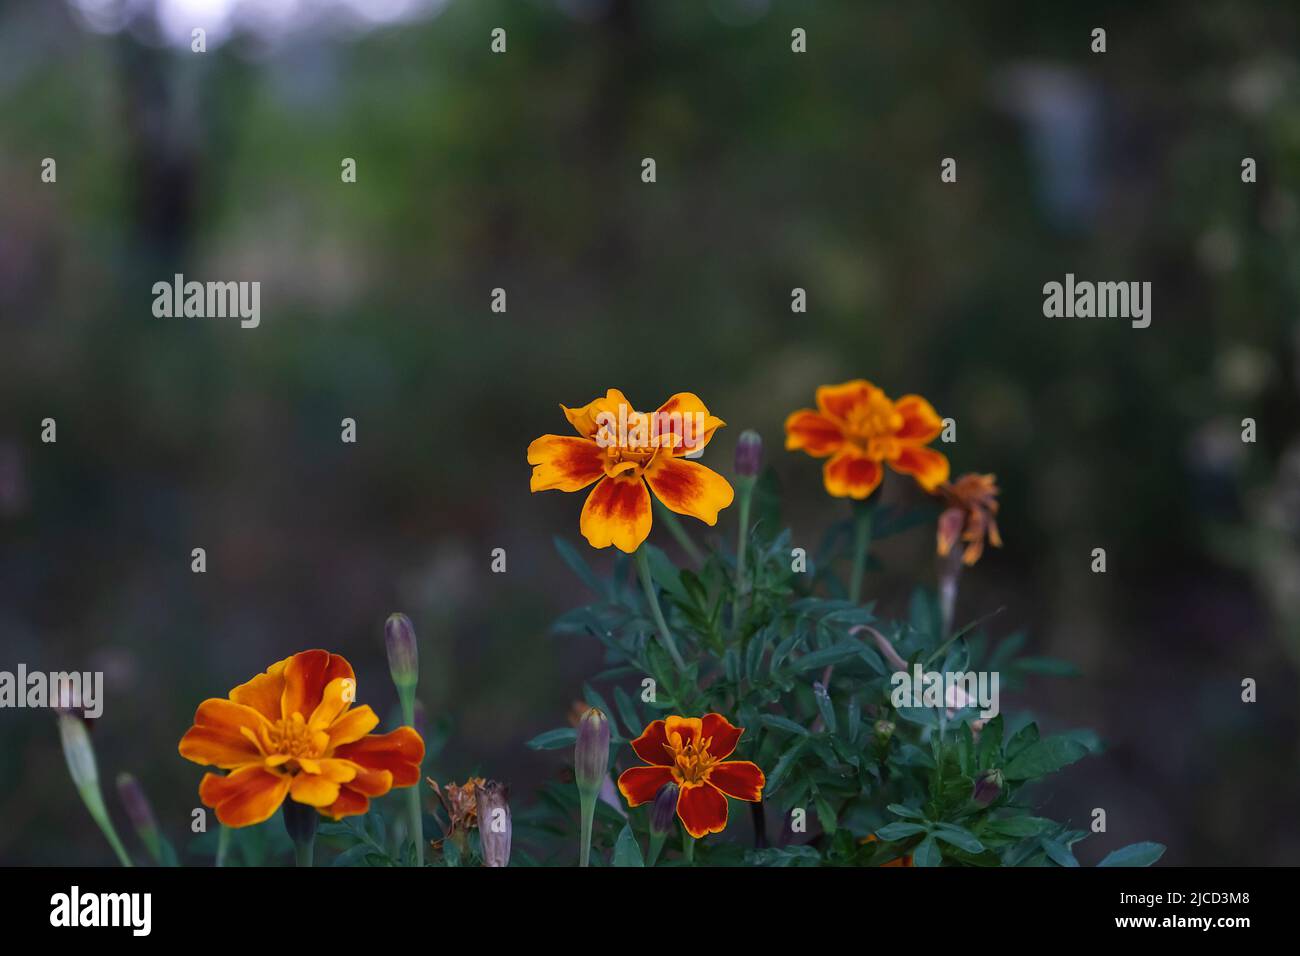 French marigold (Tagetes patula) blooming flowers Stock Photo